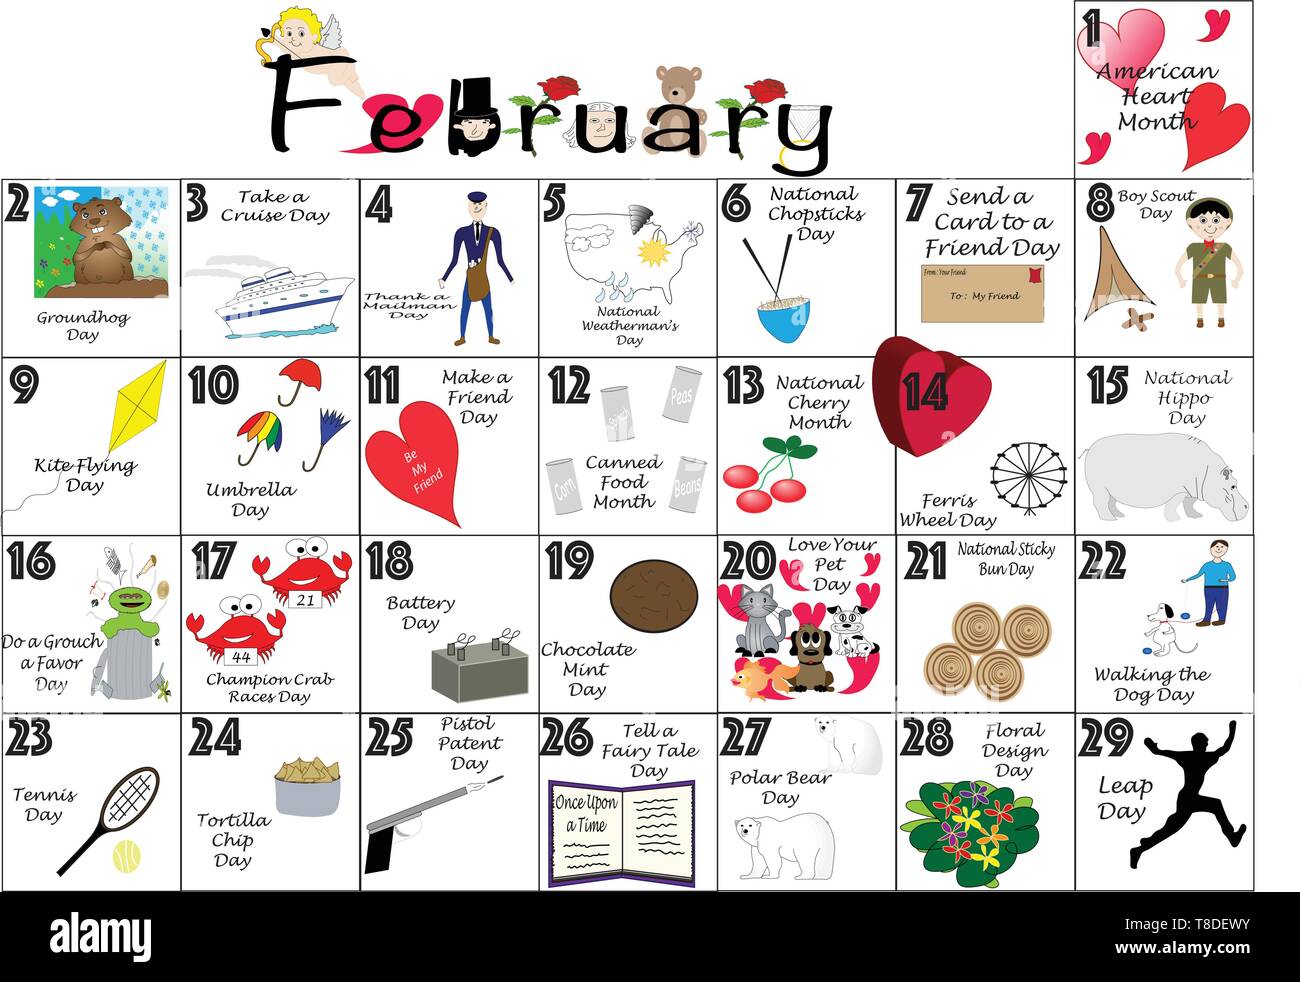 February 2020 calendar illustrated with daily Quirky Holidays and Unusual Celebrations Stock ...